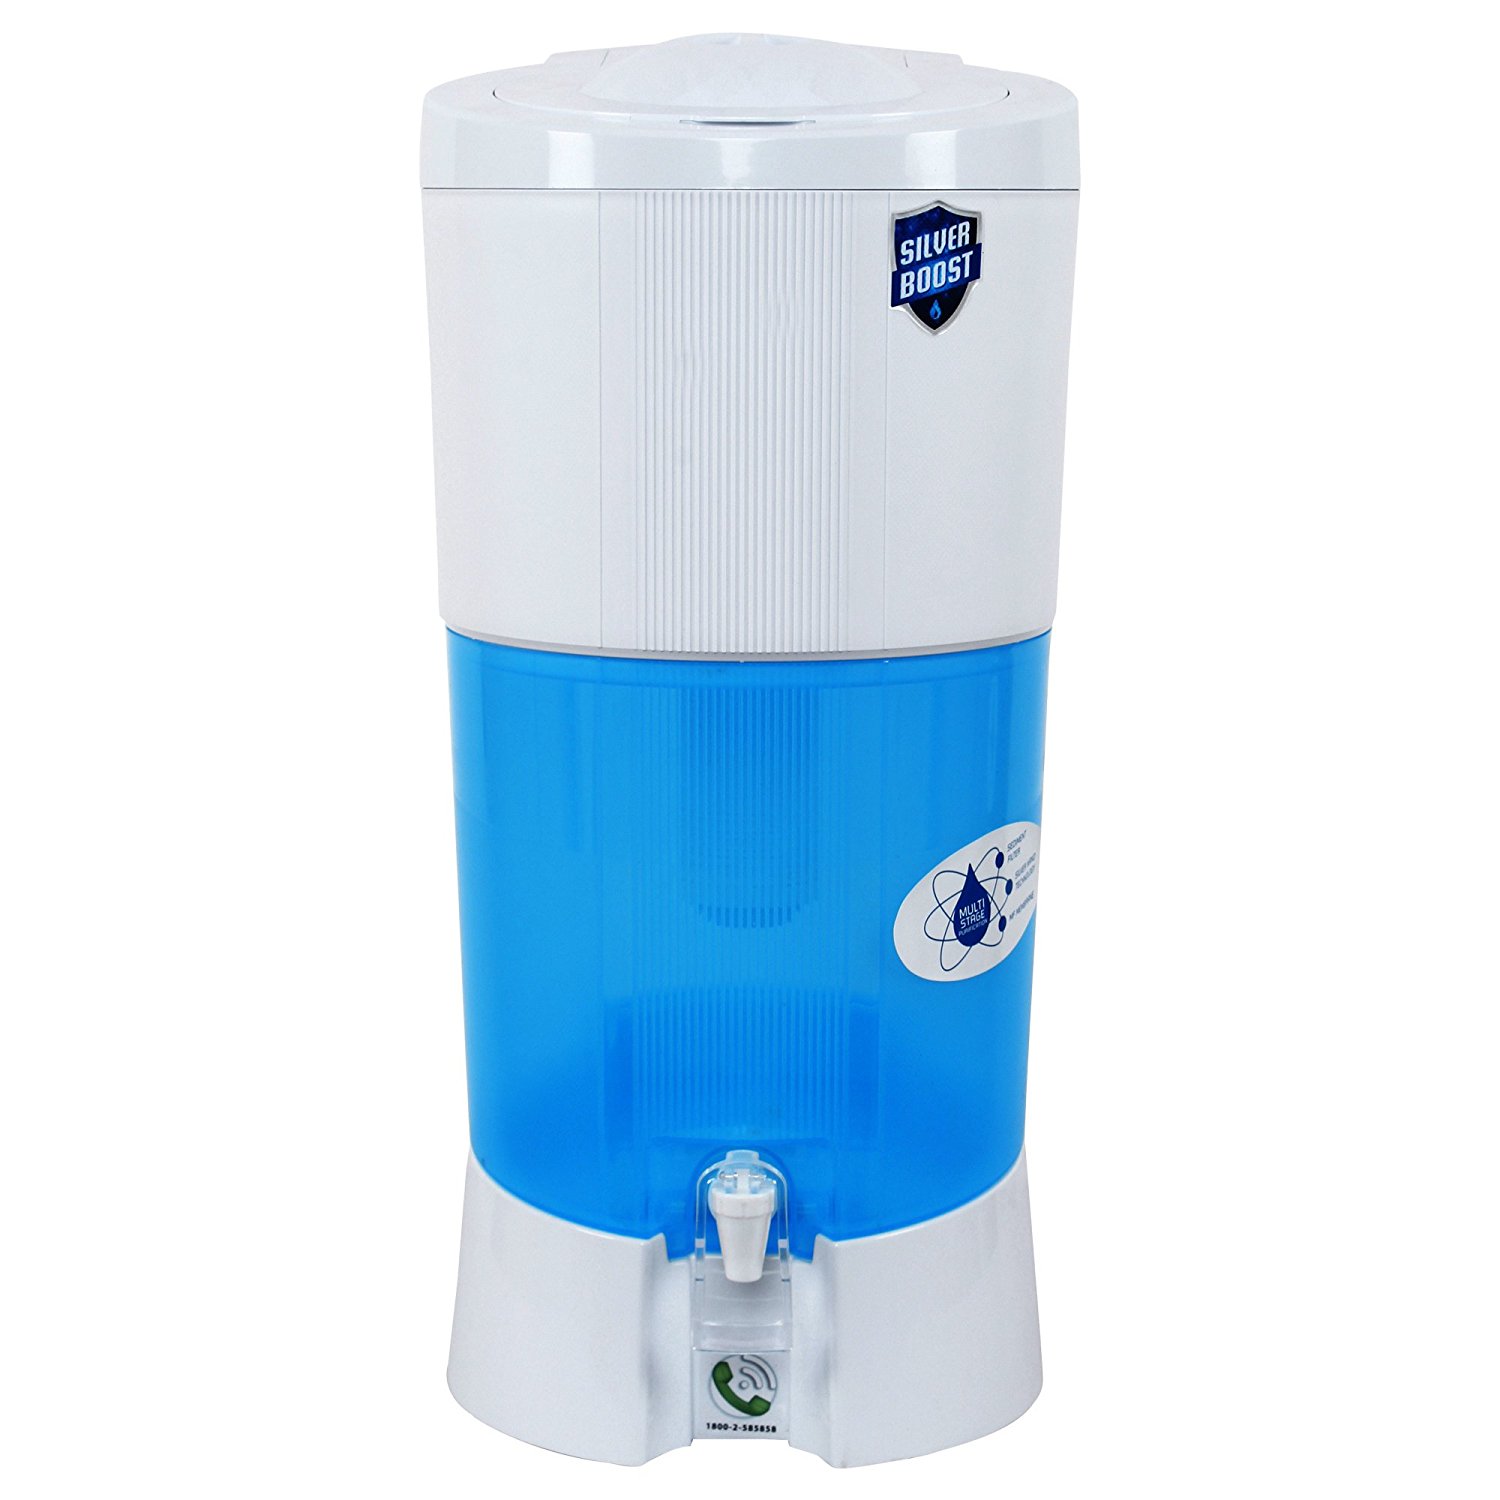 Tata Swach Silver Boost 27 Litre Gravity Based Water Purifier Review